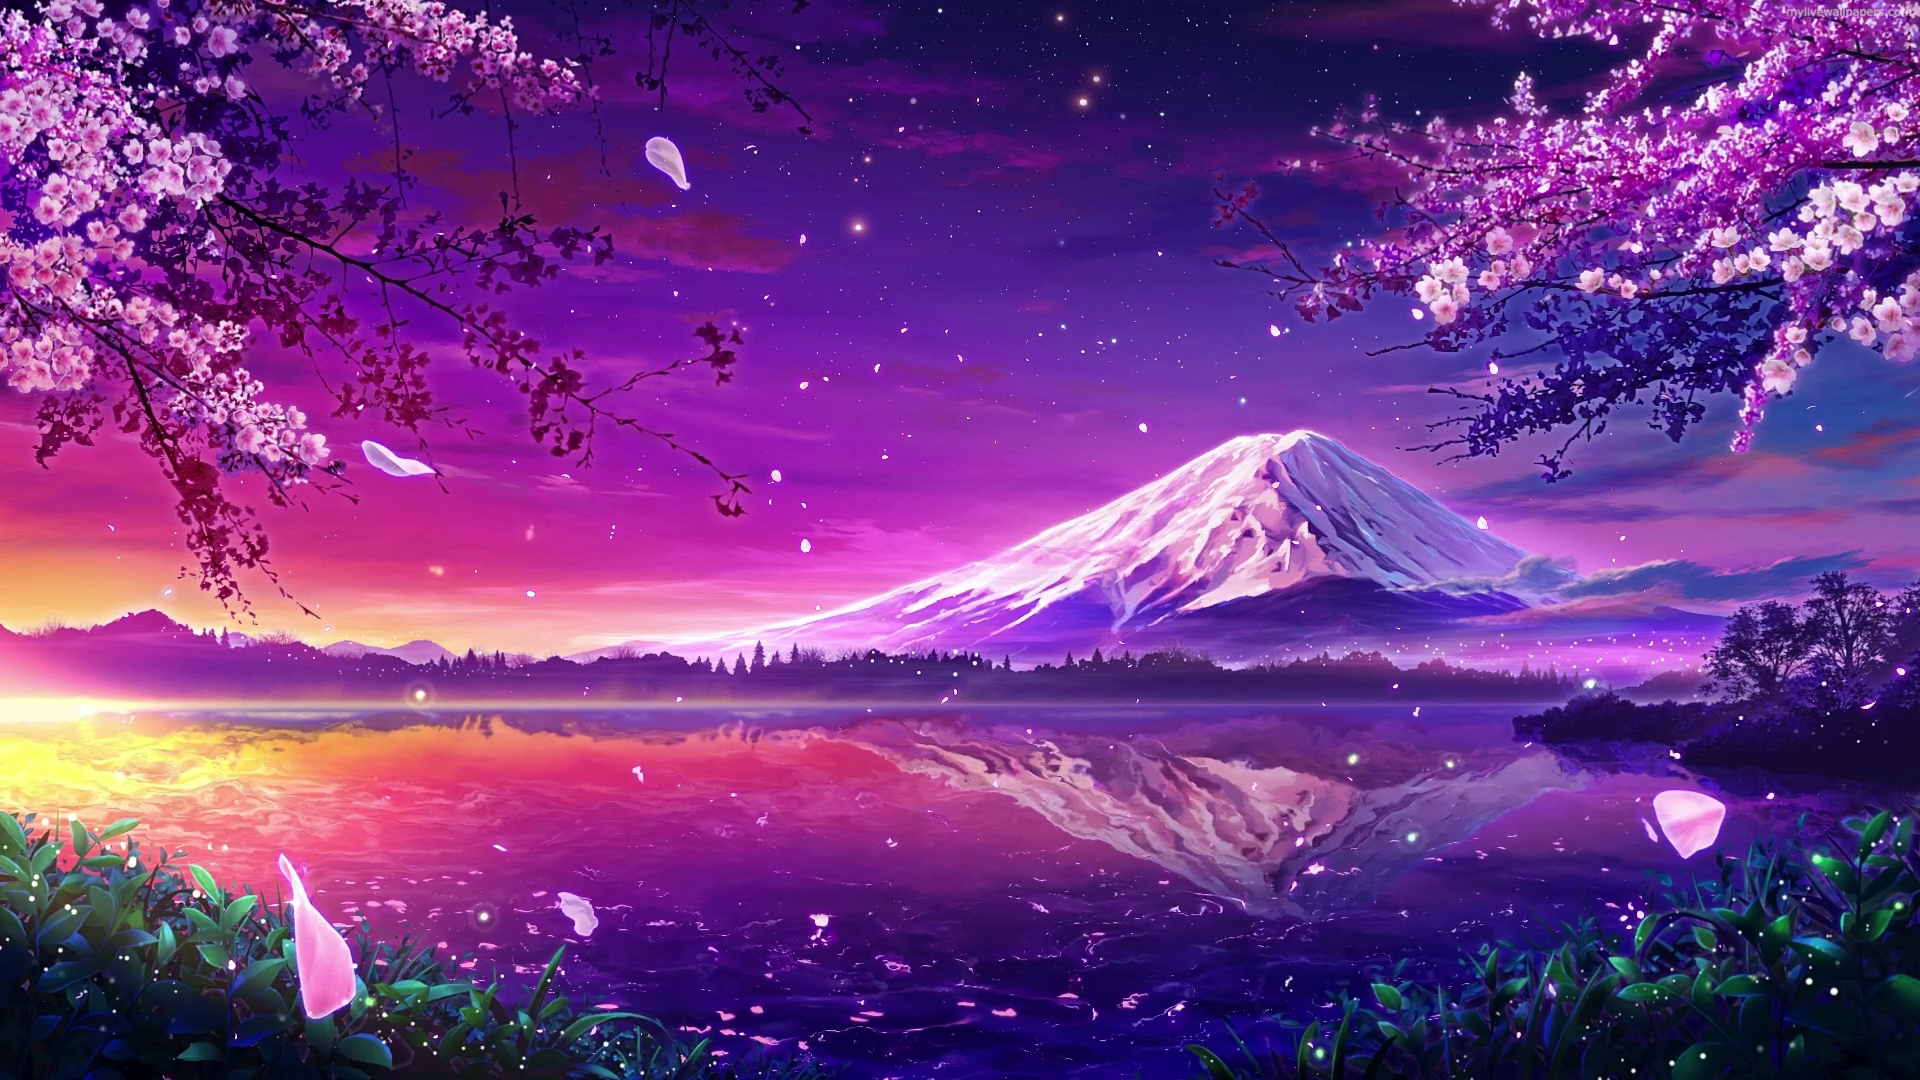 Download 1920x1080 Mount Fuji, Anime Landscape, Cherry Blossom, Petals  Wallpapers for Widescreen